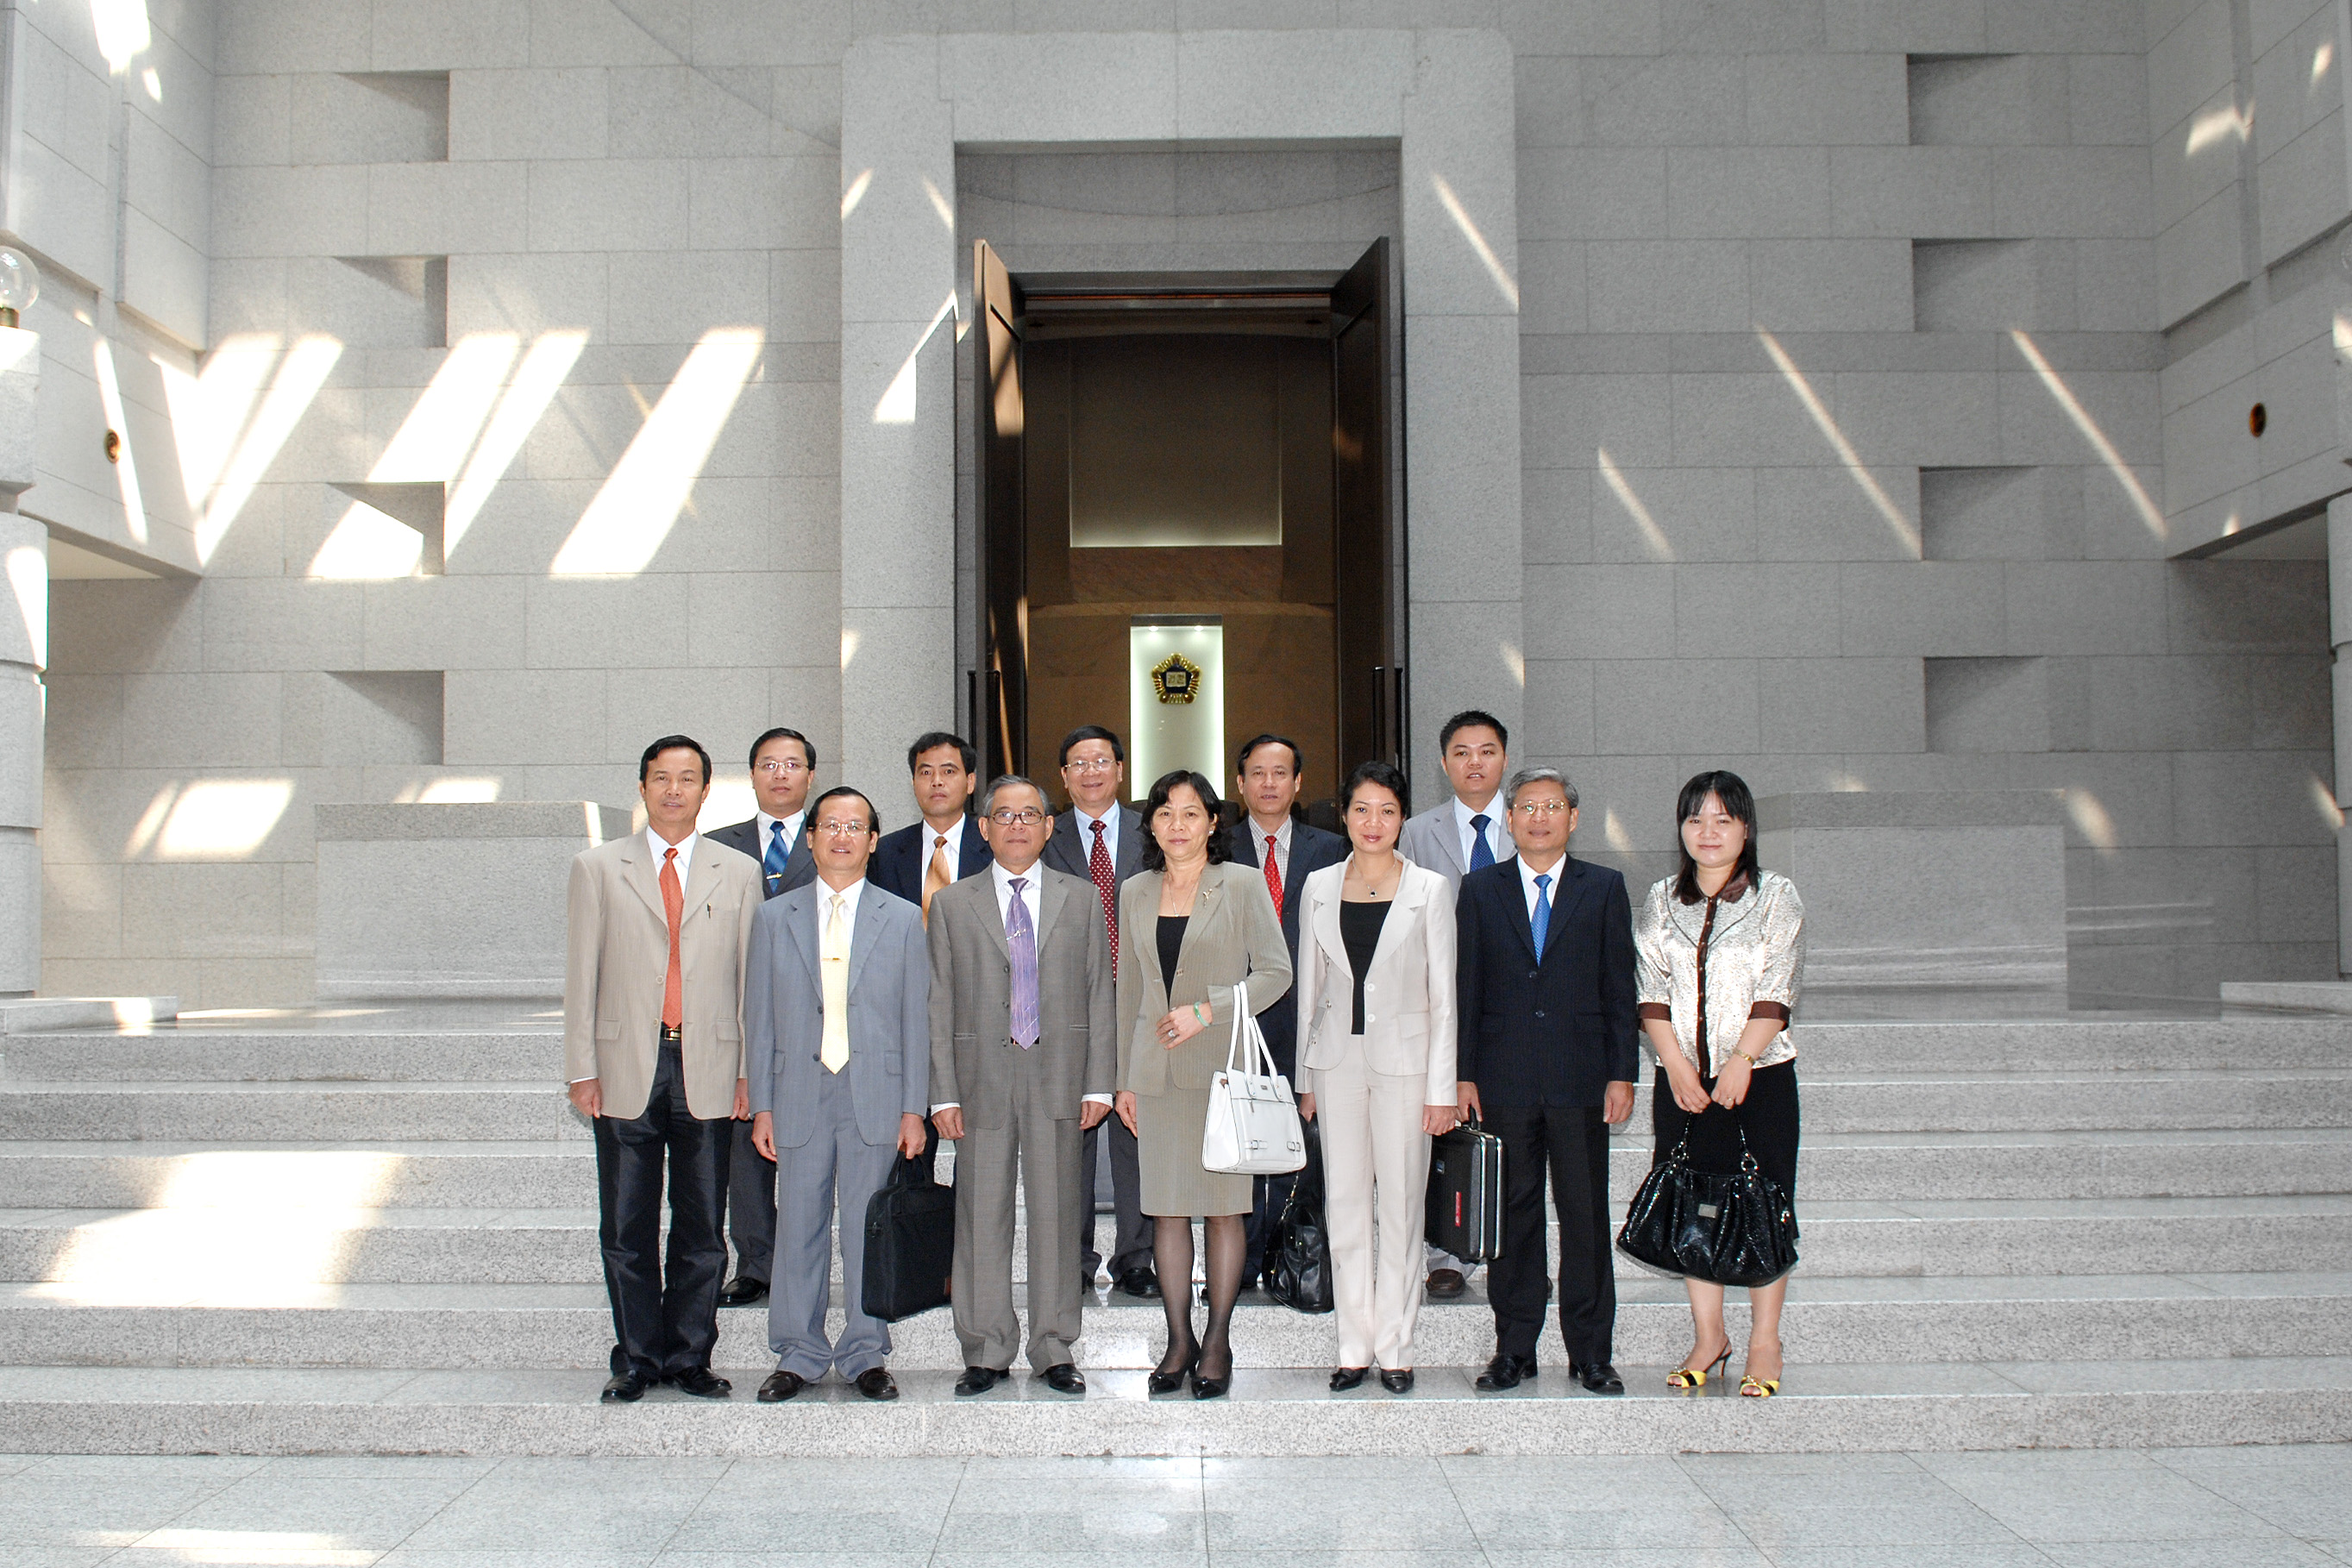 [07_27_09]The delegation of Judicial Committee of the National Assembly of Vietnam visits the Supreme Court of Korea